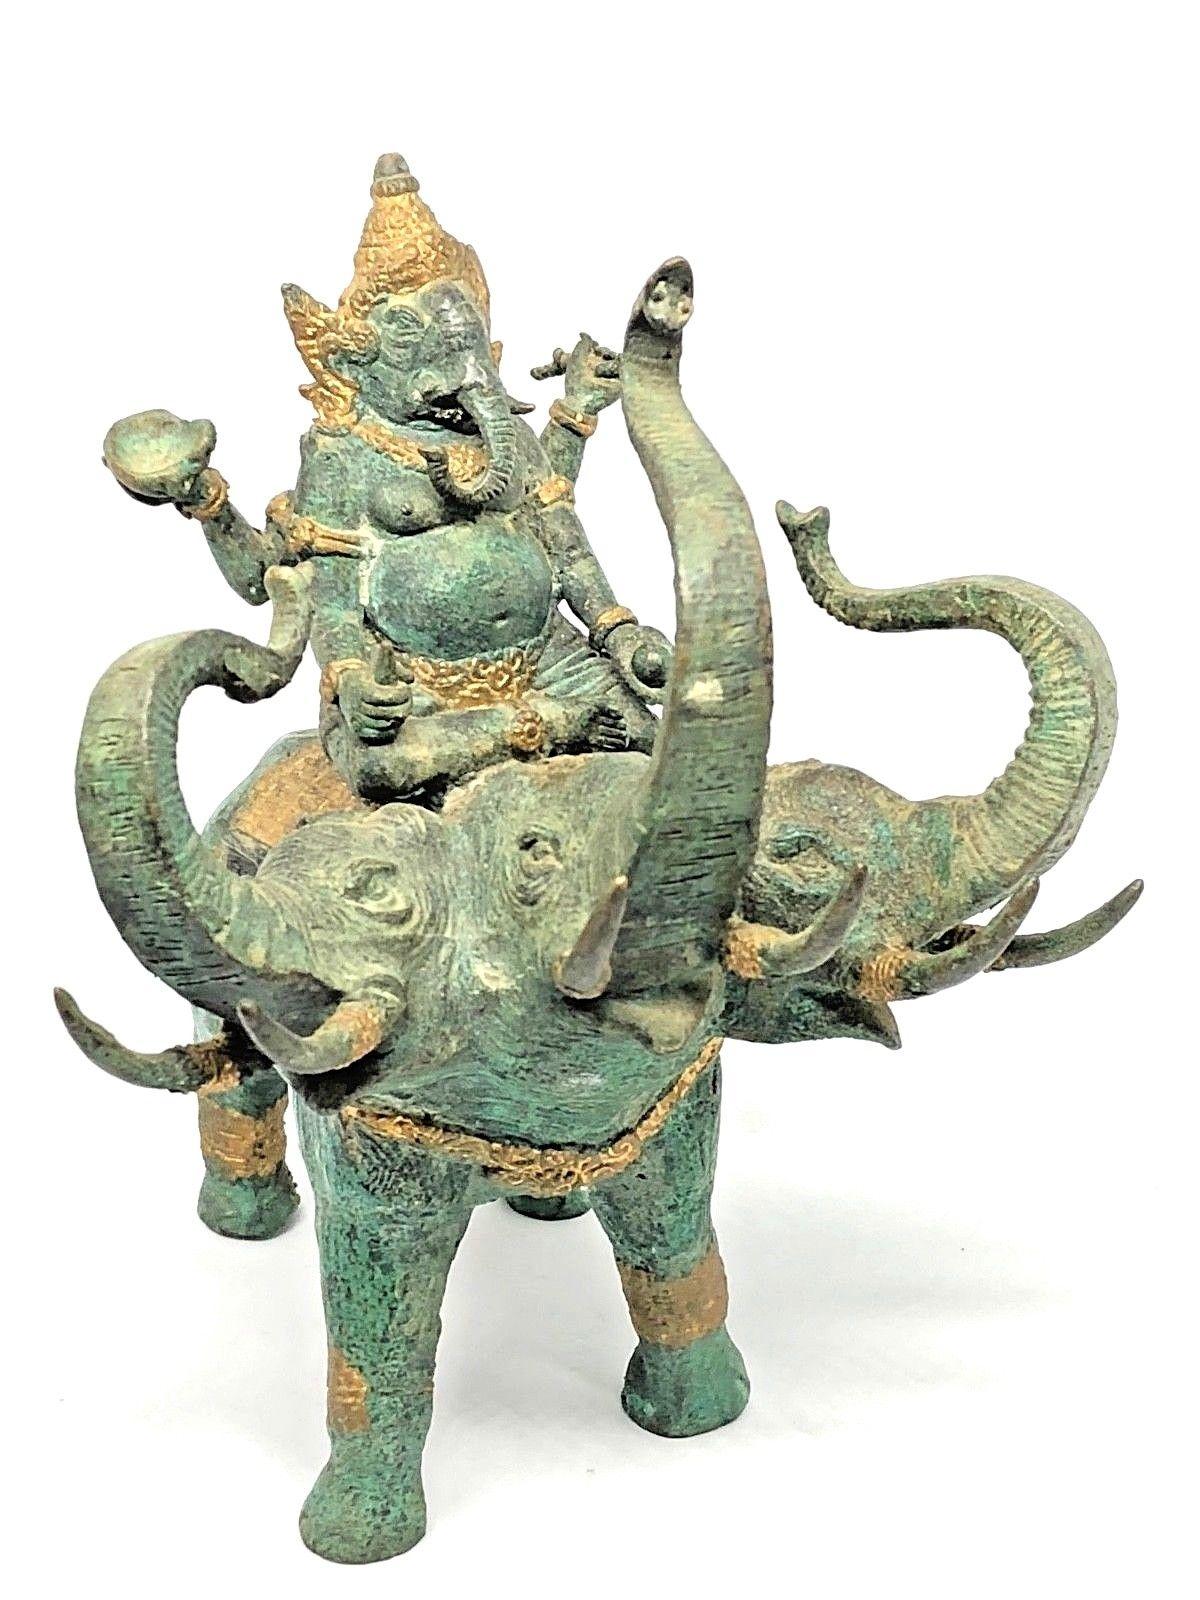 A decorative handmade elephant sculpture or statue. Some wear but this is old-age. Made of bronze. We think it is from Asia and was made in the mid-20th century.